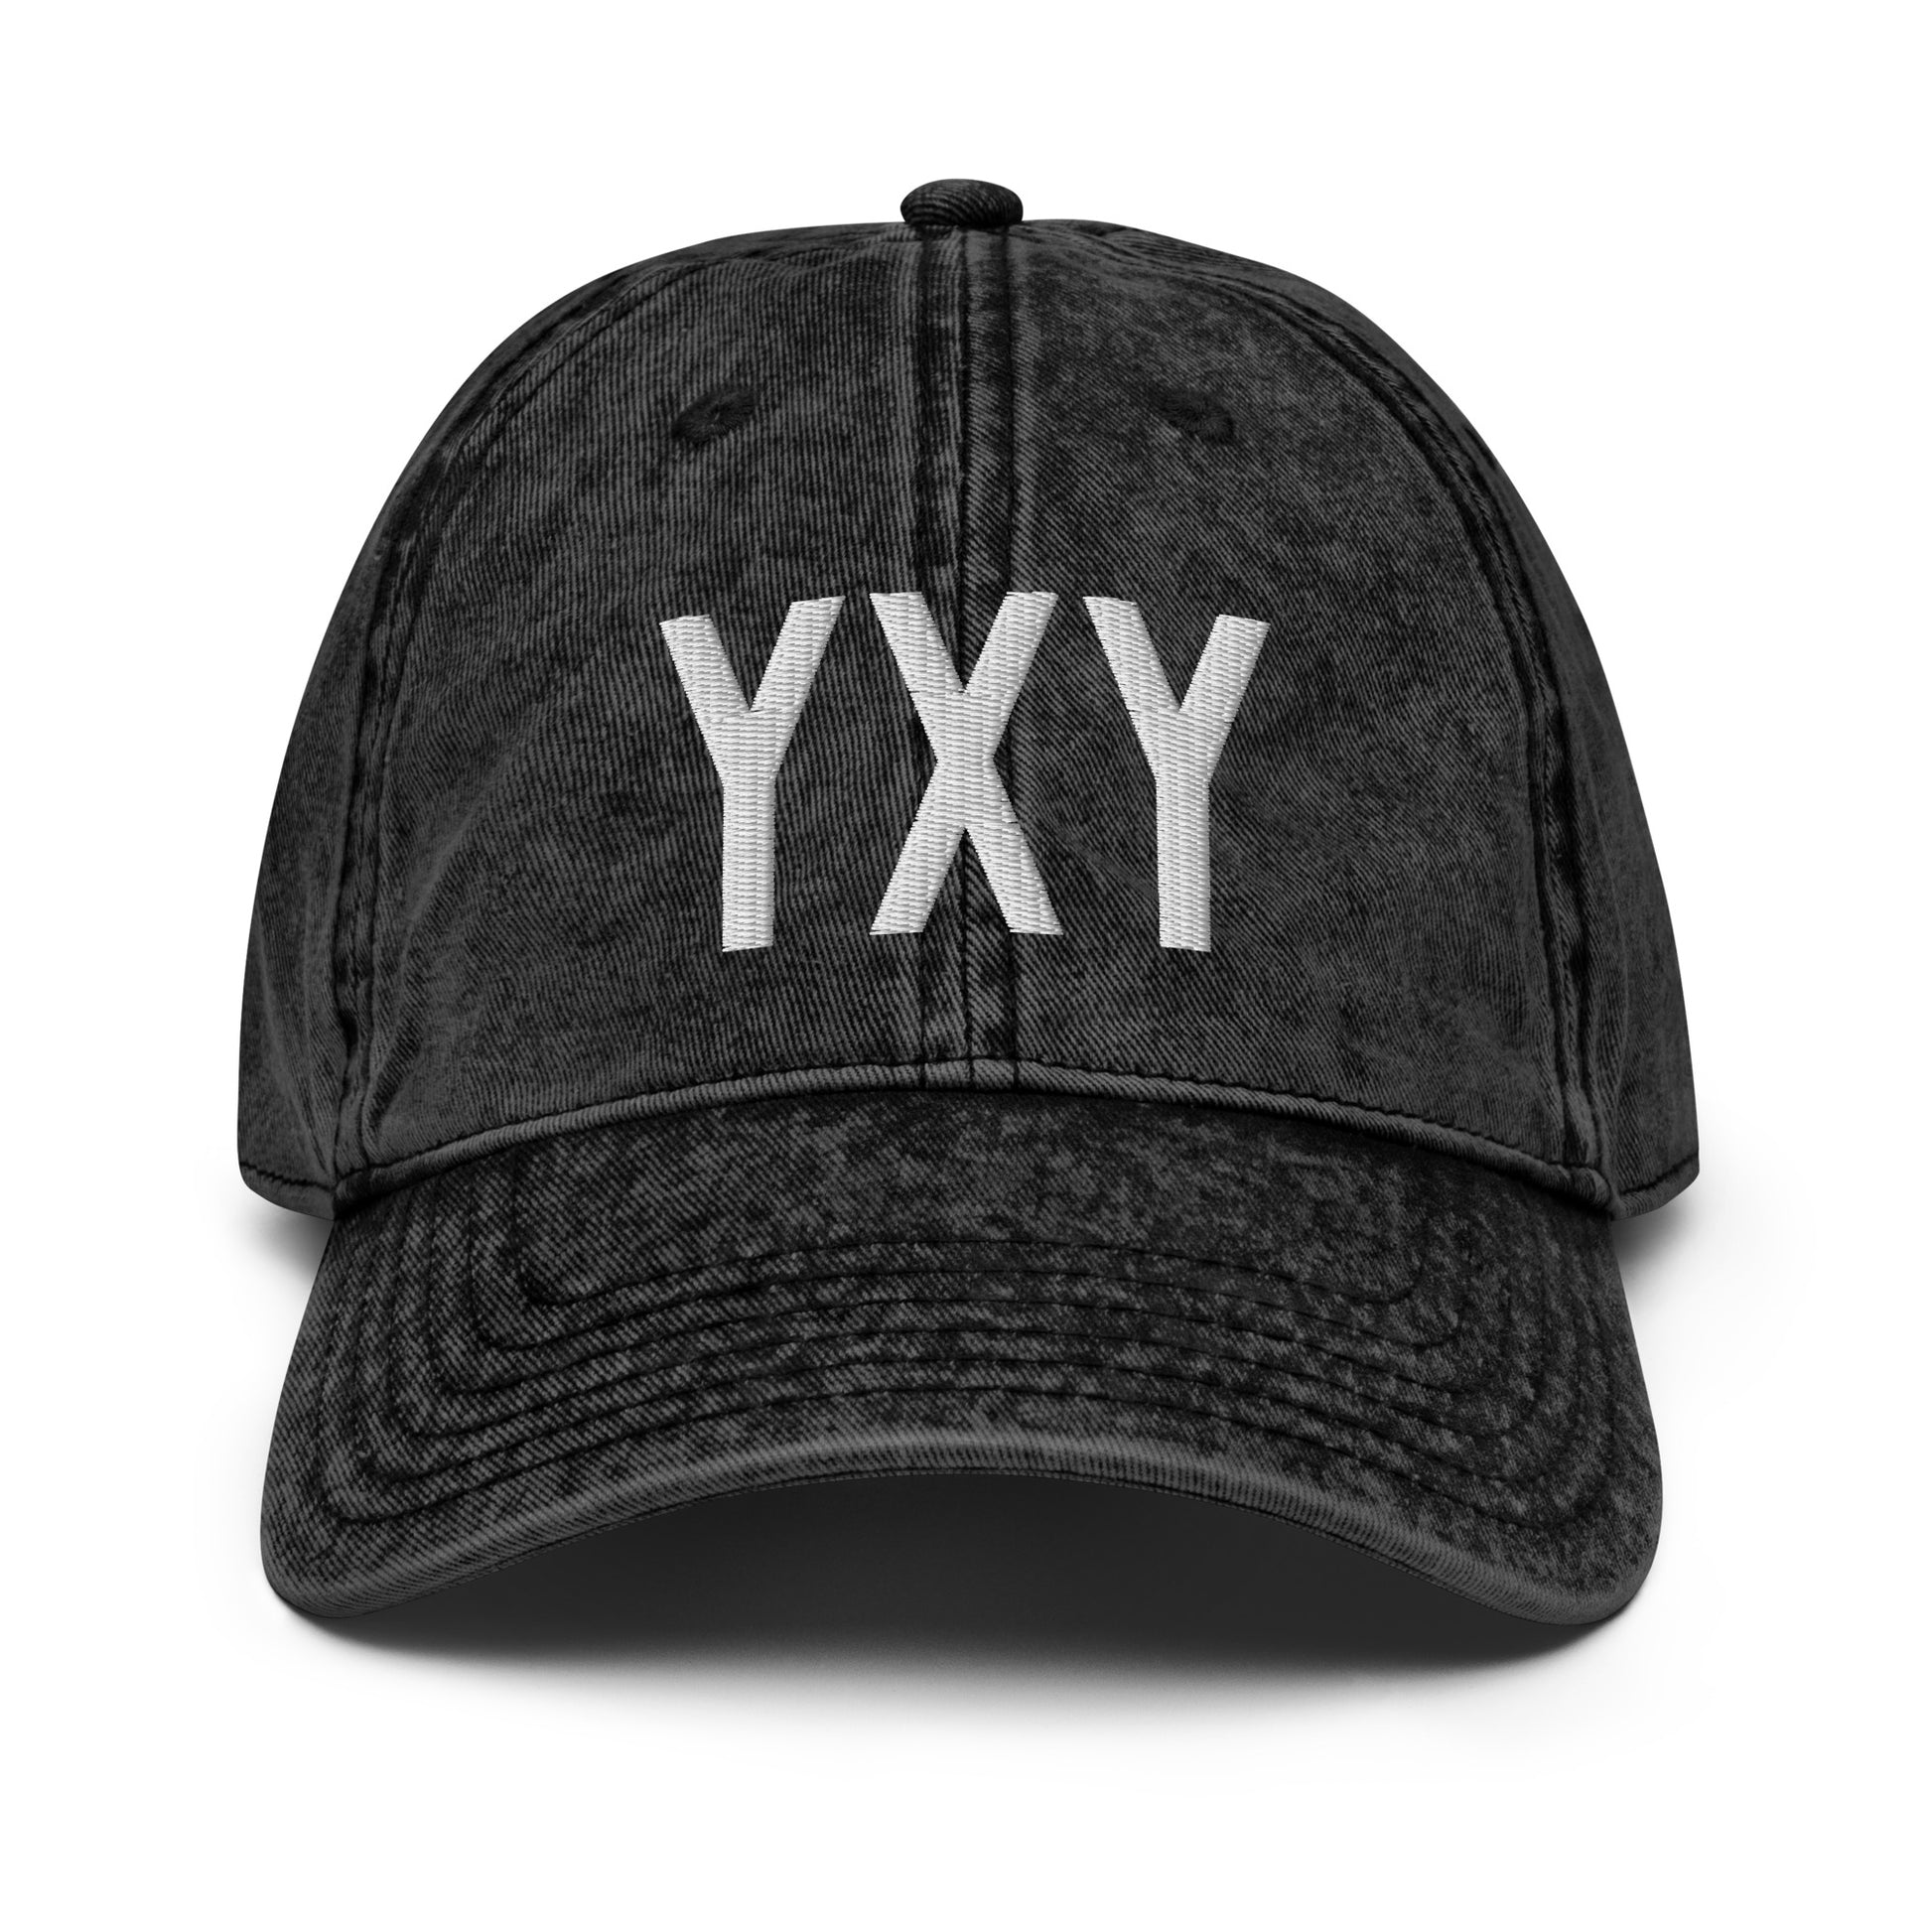 Airport Code Twill Cap - White • YXY Whitehorse • YHM Designs - Image 14